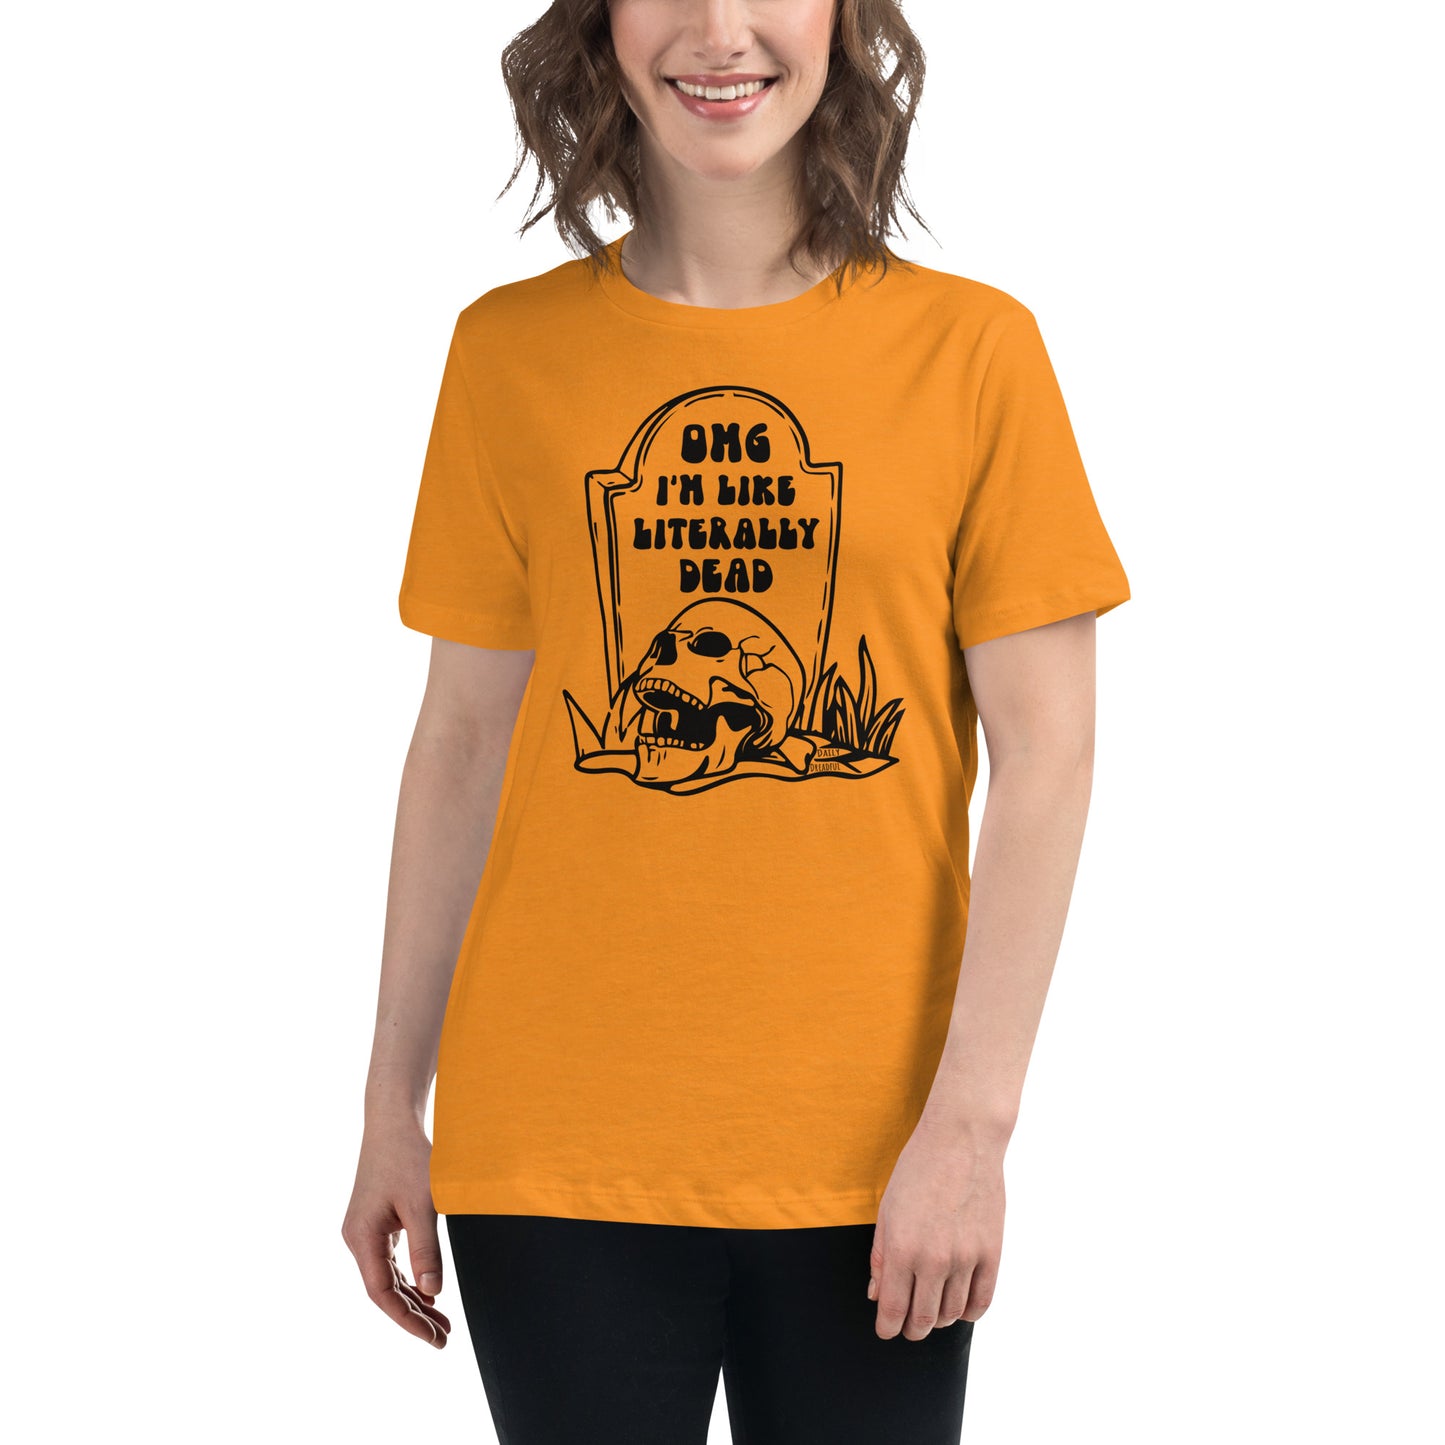 heather marmalade "OMG Dead" women's relaxed t-shirt, women's tee from daily dreadful